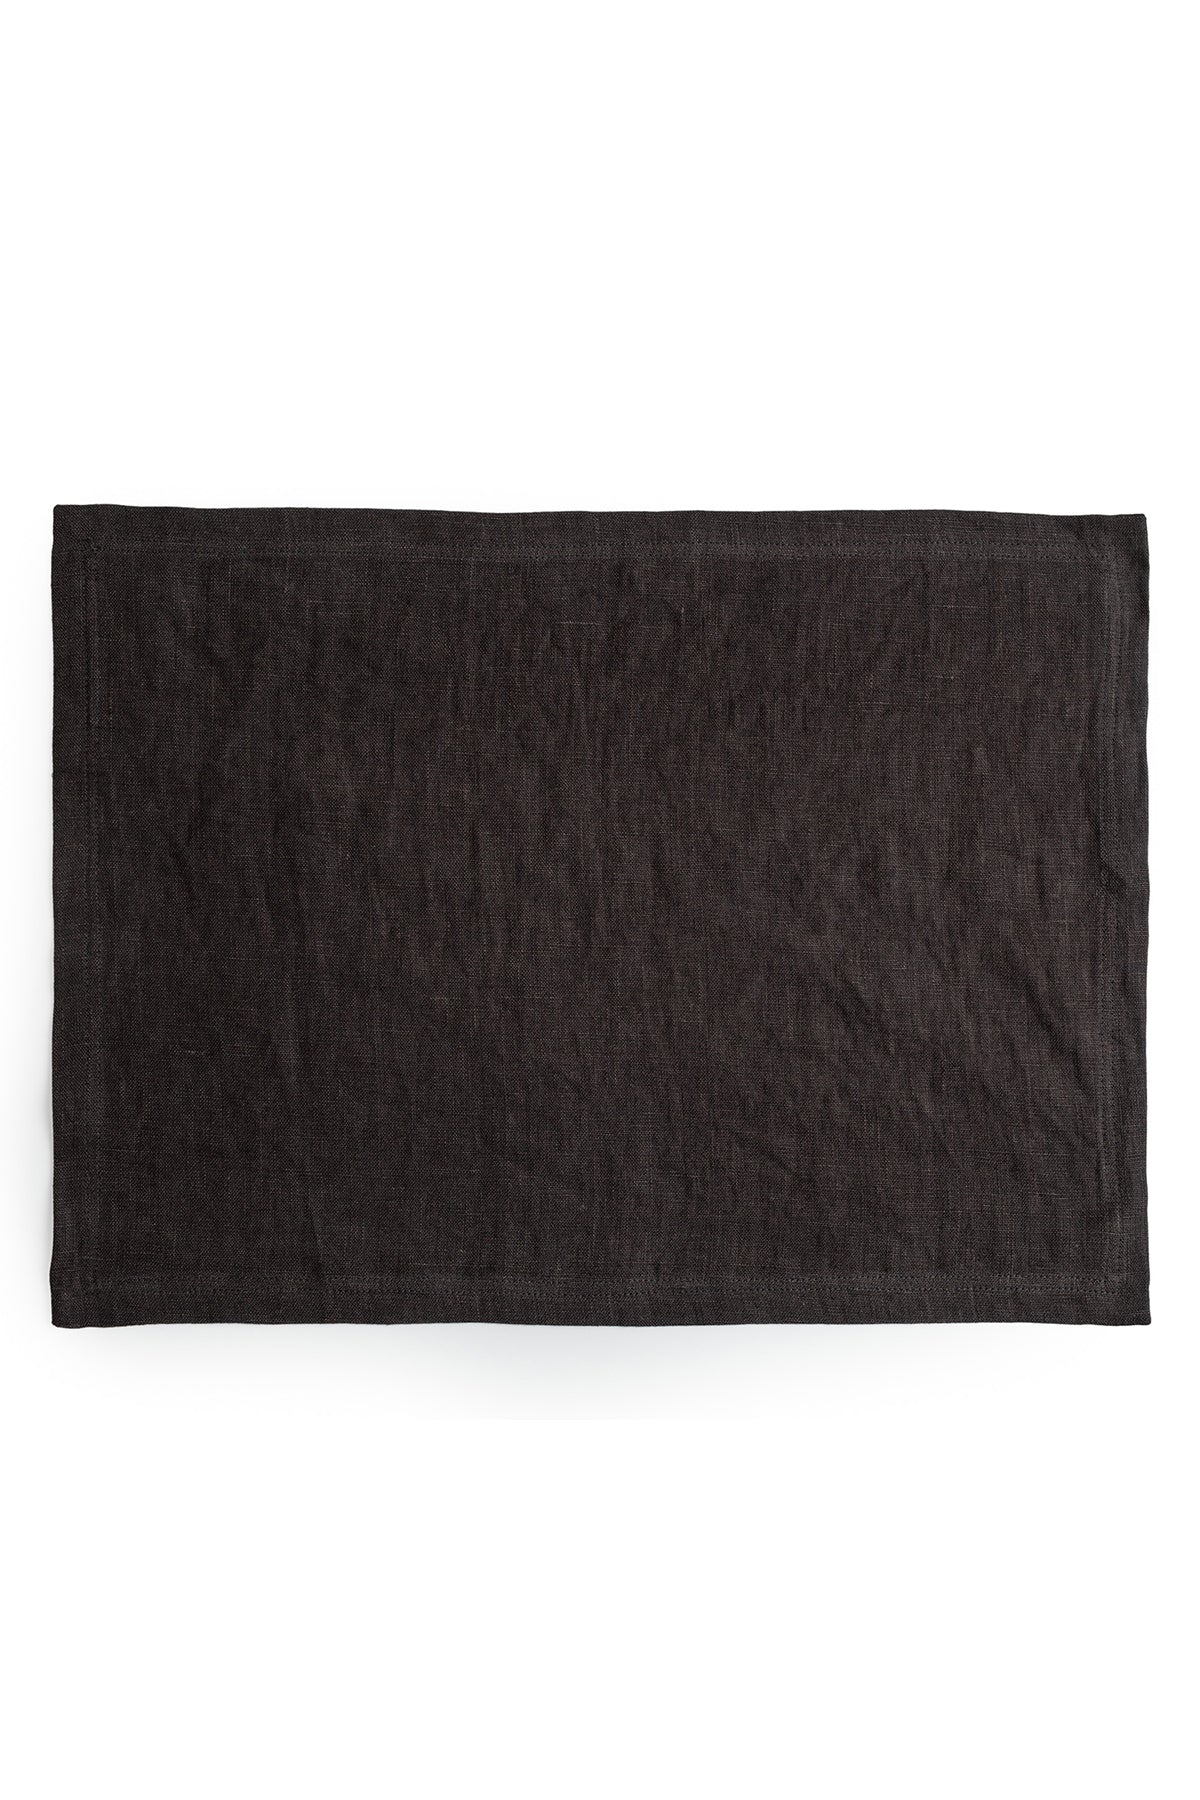 A plain black dyed linen placemat from Jenny Graham Home placed flat on a white background.-15072810467521